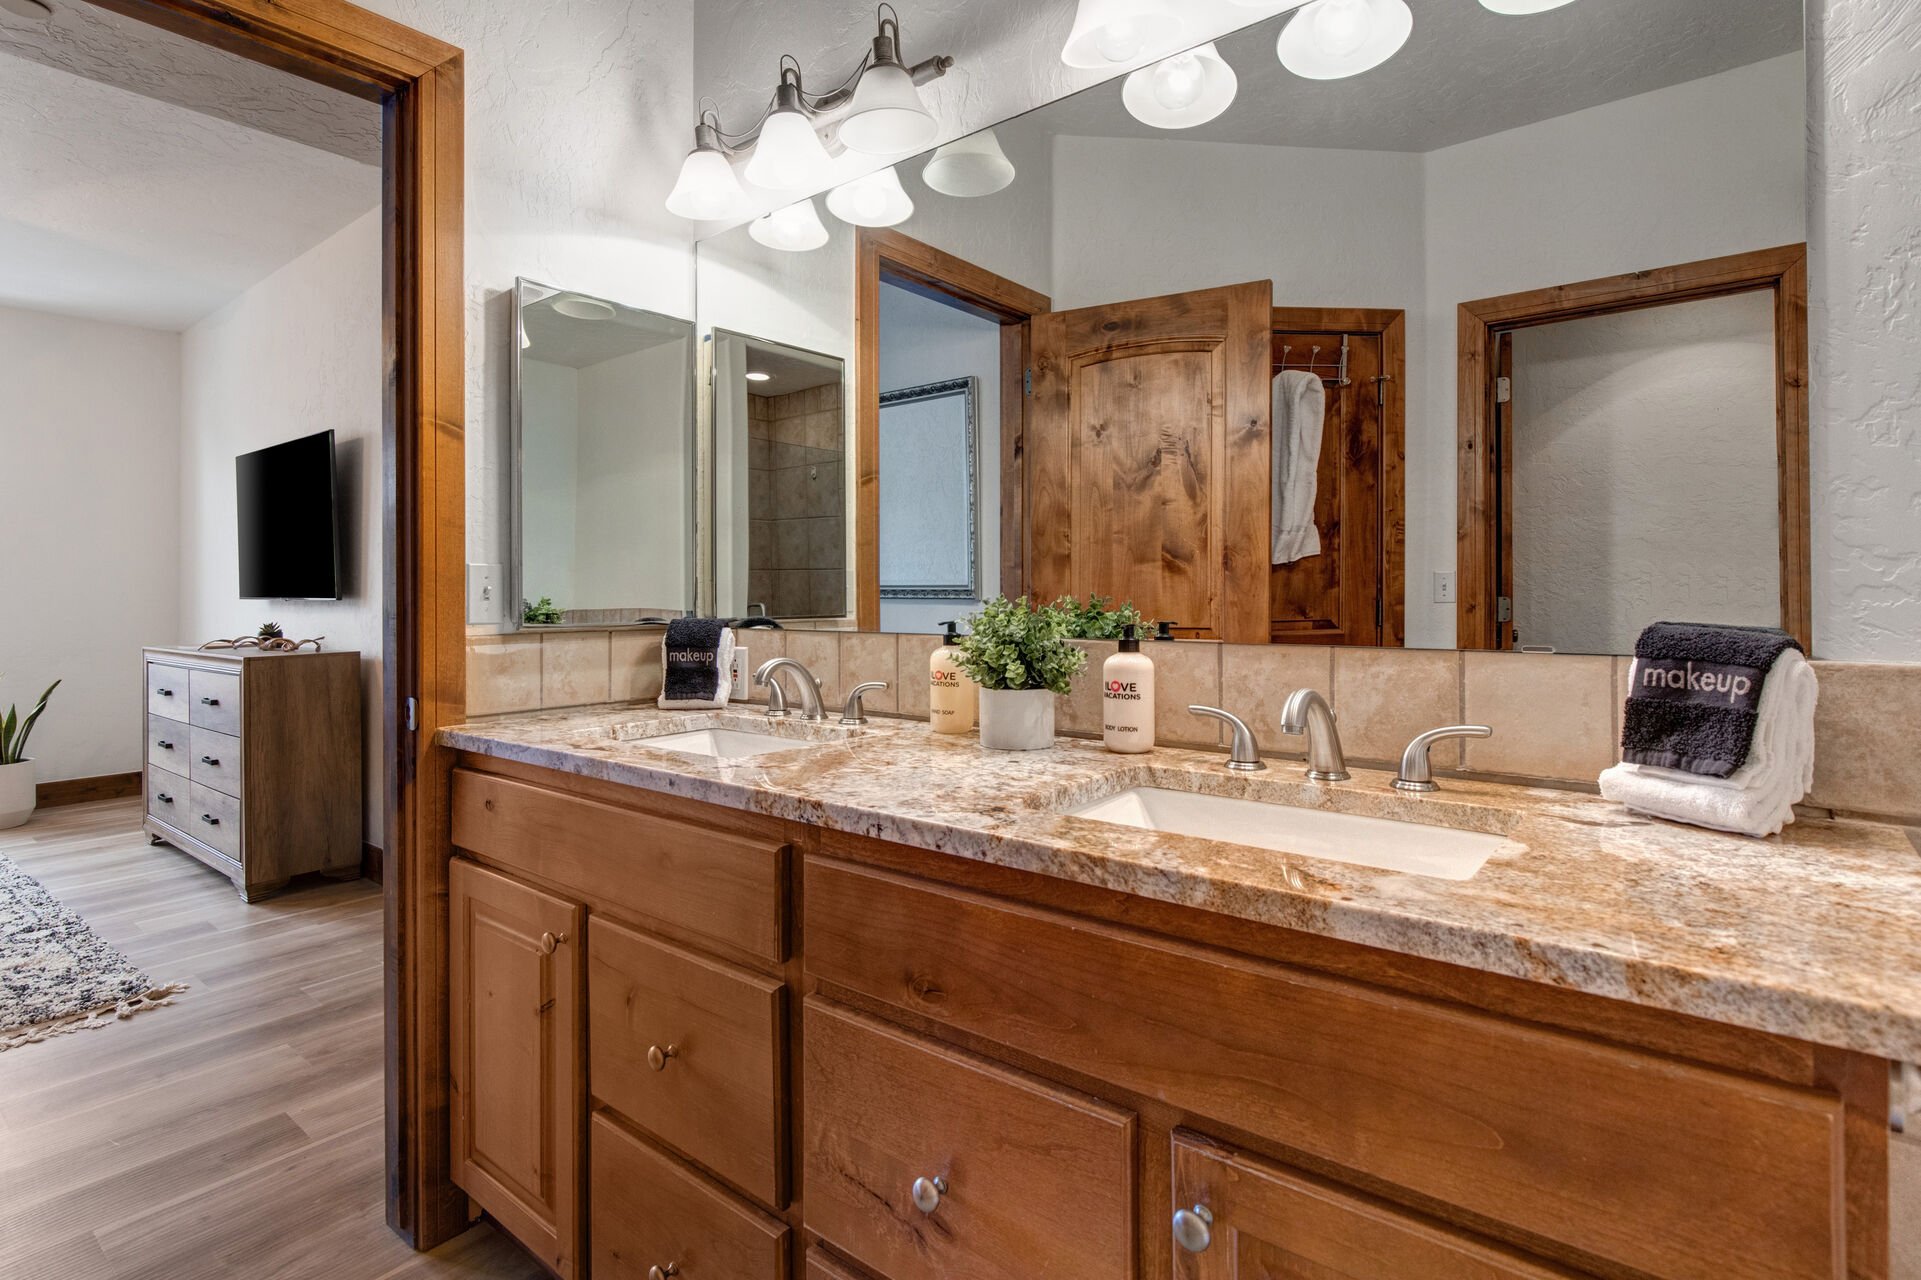 Master Bath with a Granite Countertop Vanity with Two Sinks